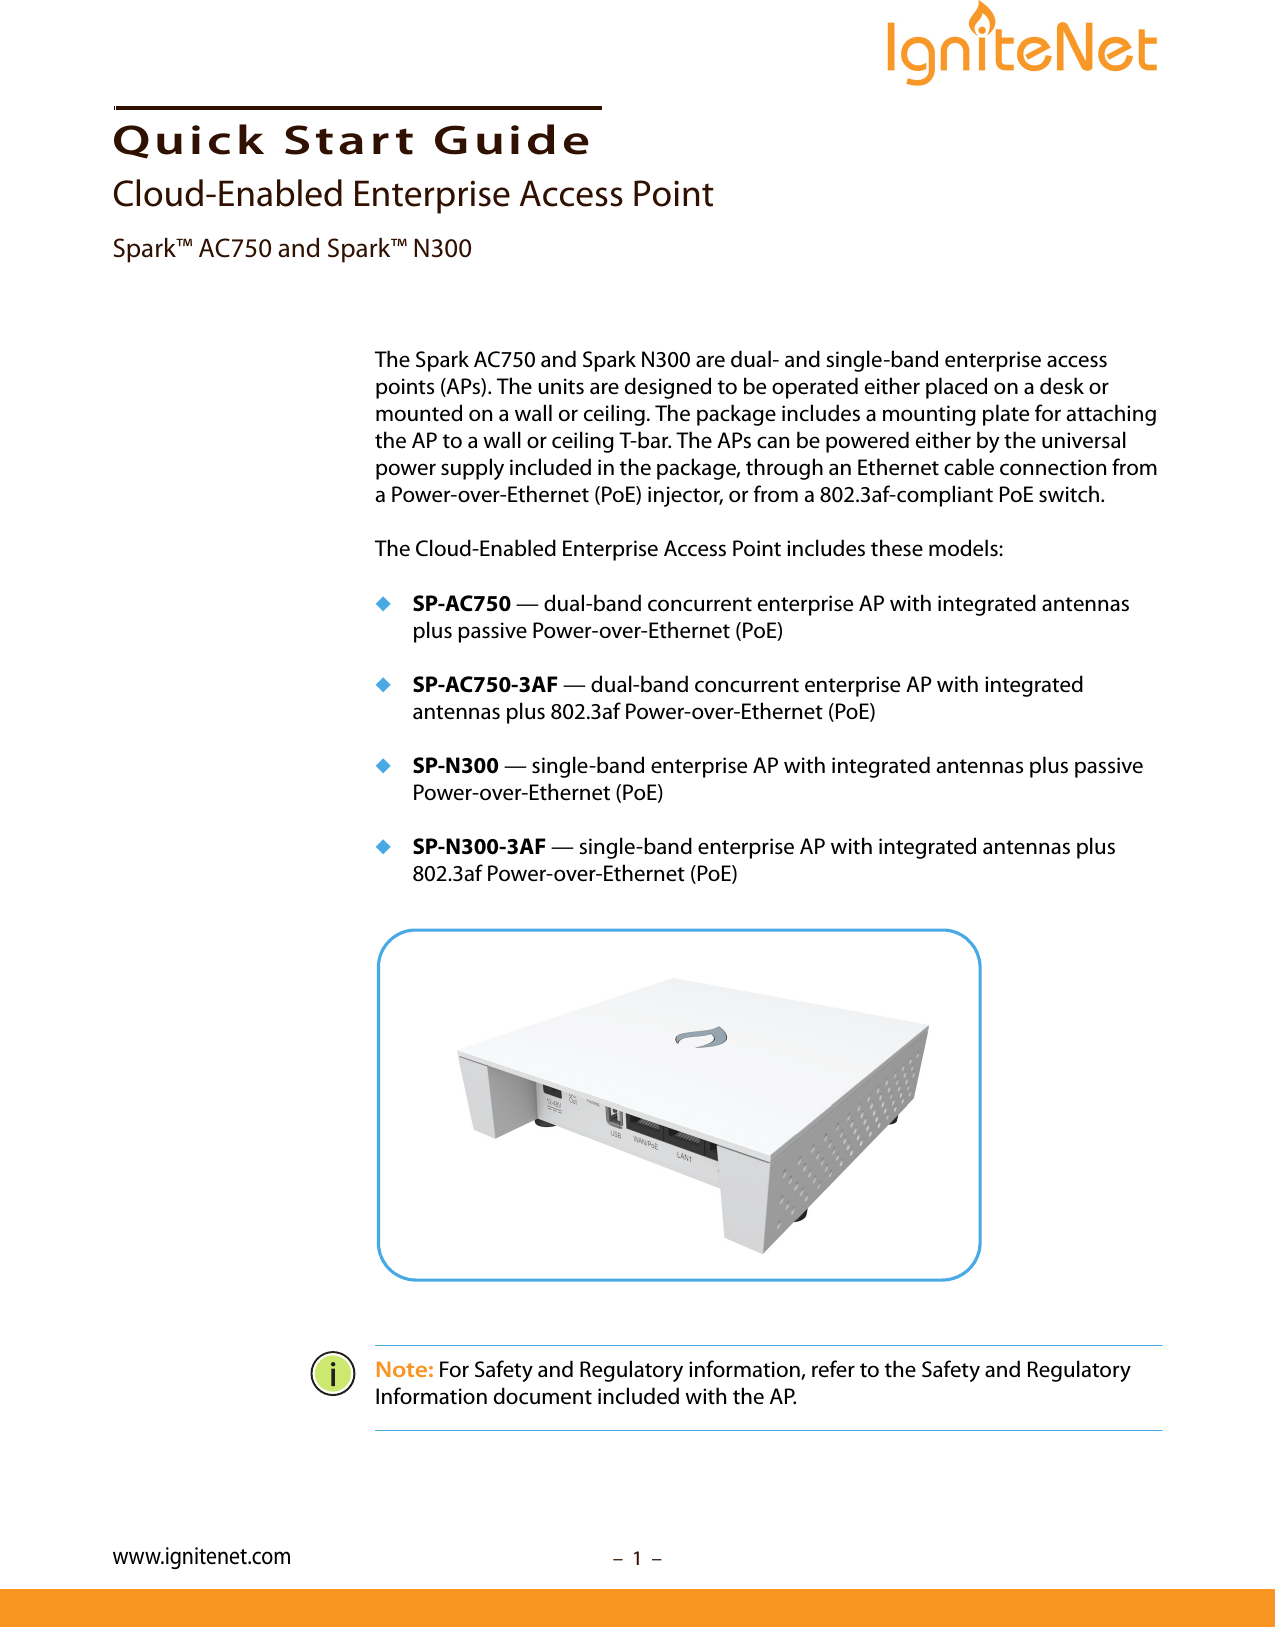 –  1  –Quick Start GuideCloud-Enabled Enterprise Access PointSpark™ AC750 and Spark™ N300The Spark AC750 and Spark N300 are dual- and single-band enterprise access points (APs). The units are designed to be operated either placed on a desk or mounted on a wall or ceiling. The package includes a mounting plate for attaching the AP to a wall or ceiling T-bar. The APs can be powered either by the universal power supply included in the package, through an Ethernet cable connection from a Power-over-Ethernet (PoE) injector, or from a 802.3af-compliant PoE switch.The Cloud-Enabled Enterprise Access Point includes these models:◆SP-AC750 — dual-band concurrent enterprise AP with integrated antennas plus passive Power-over-Ethernet (PoE)◆SP-AC750-3AF — dual-band concurrent enterprise AP with integrated antennas plus 802.3af Power-over-Ethernet (PoE)◆SP-N300 — single-band enterprise AP with integrated antennas plus passive Power-over-Ethernet (PoE)◆SP-N300-3AF — single-band enterprise AP with integrated antennas plus 802.3af Power-over-Ethernet (PoE) Note: For Safety and Regulatory information, refer to the Safety and Regulatory Information document included with the AP.www.ignitenet.com